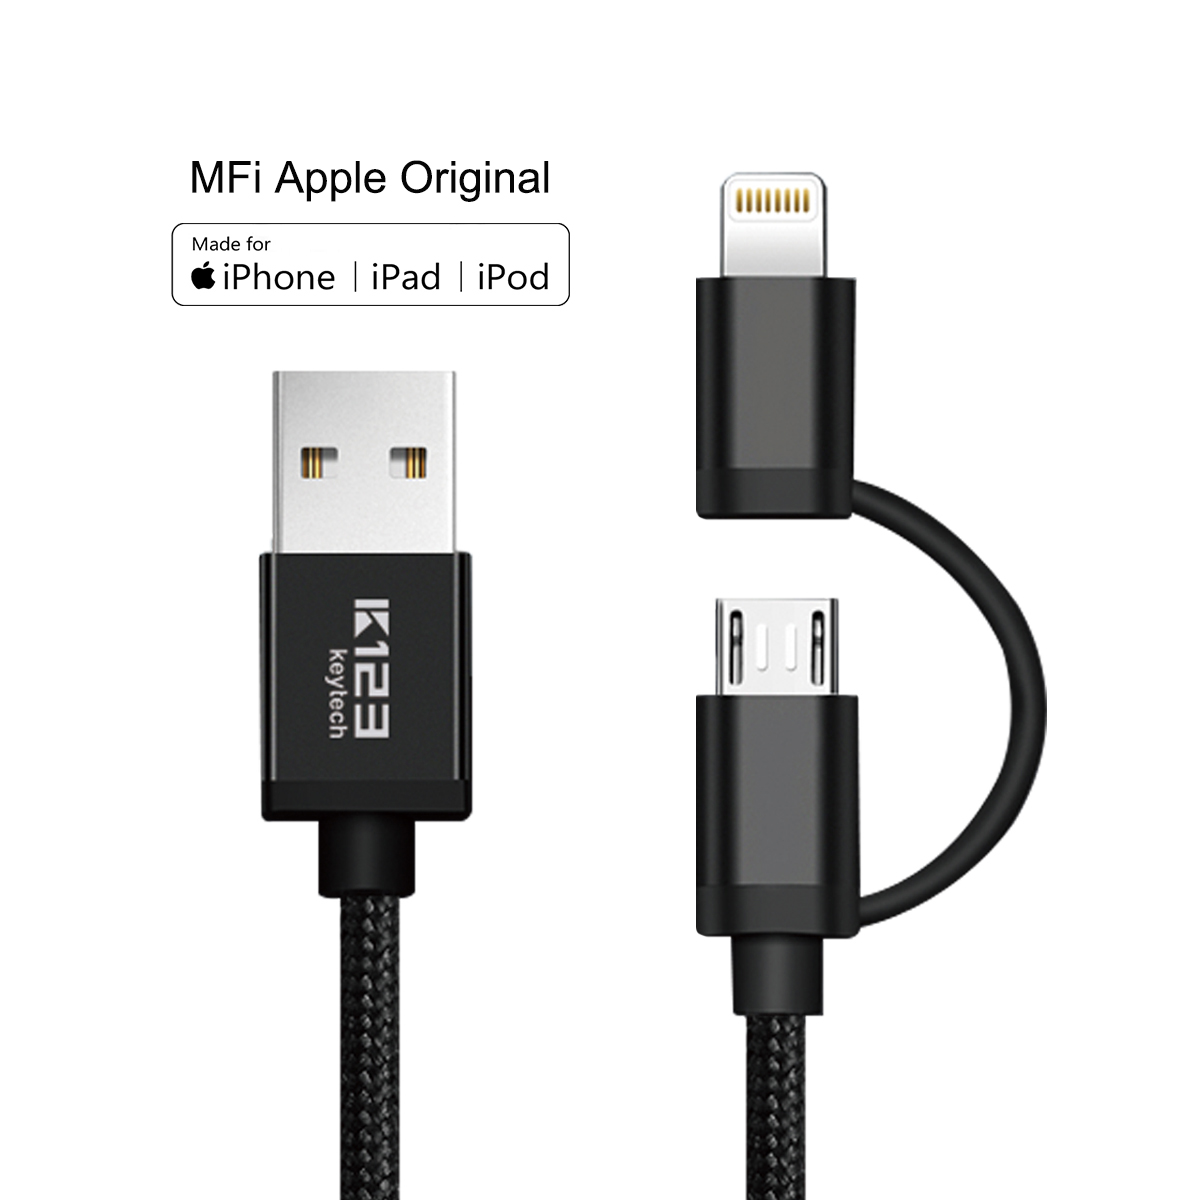 KAL007 IPhone Charger Data Cable Android / Iphone Universal Mobile Phone Cables Usb 2 In 1